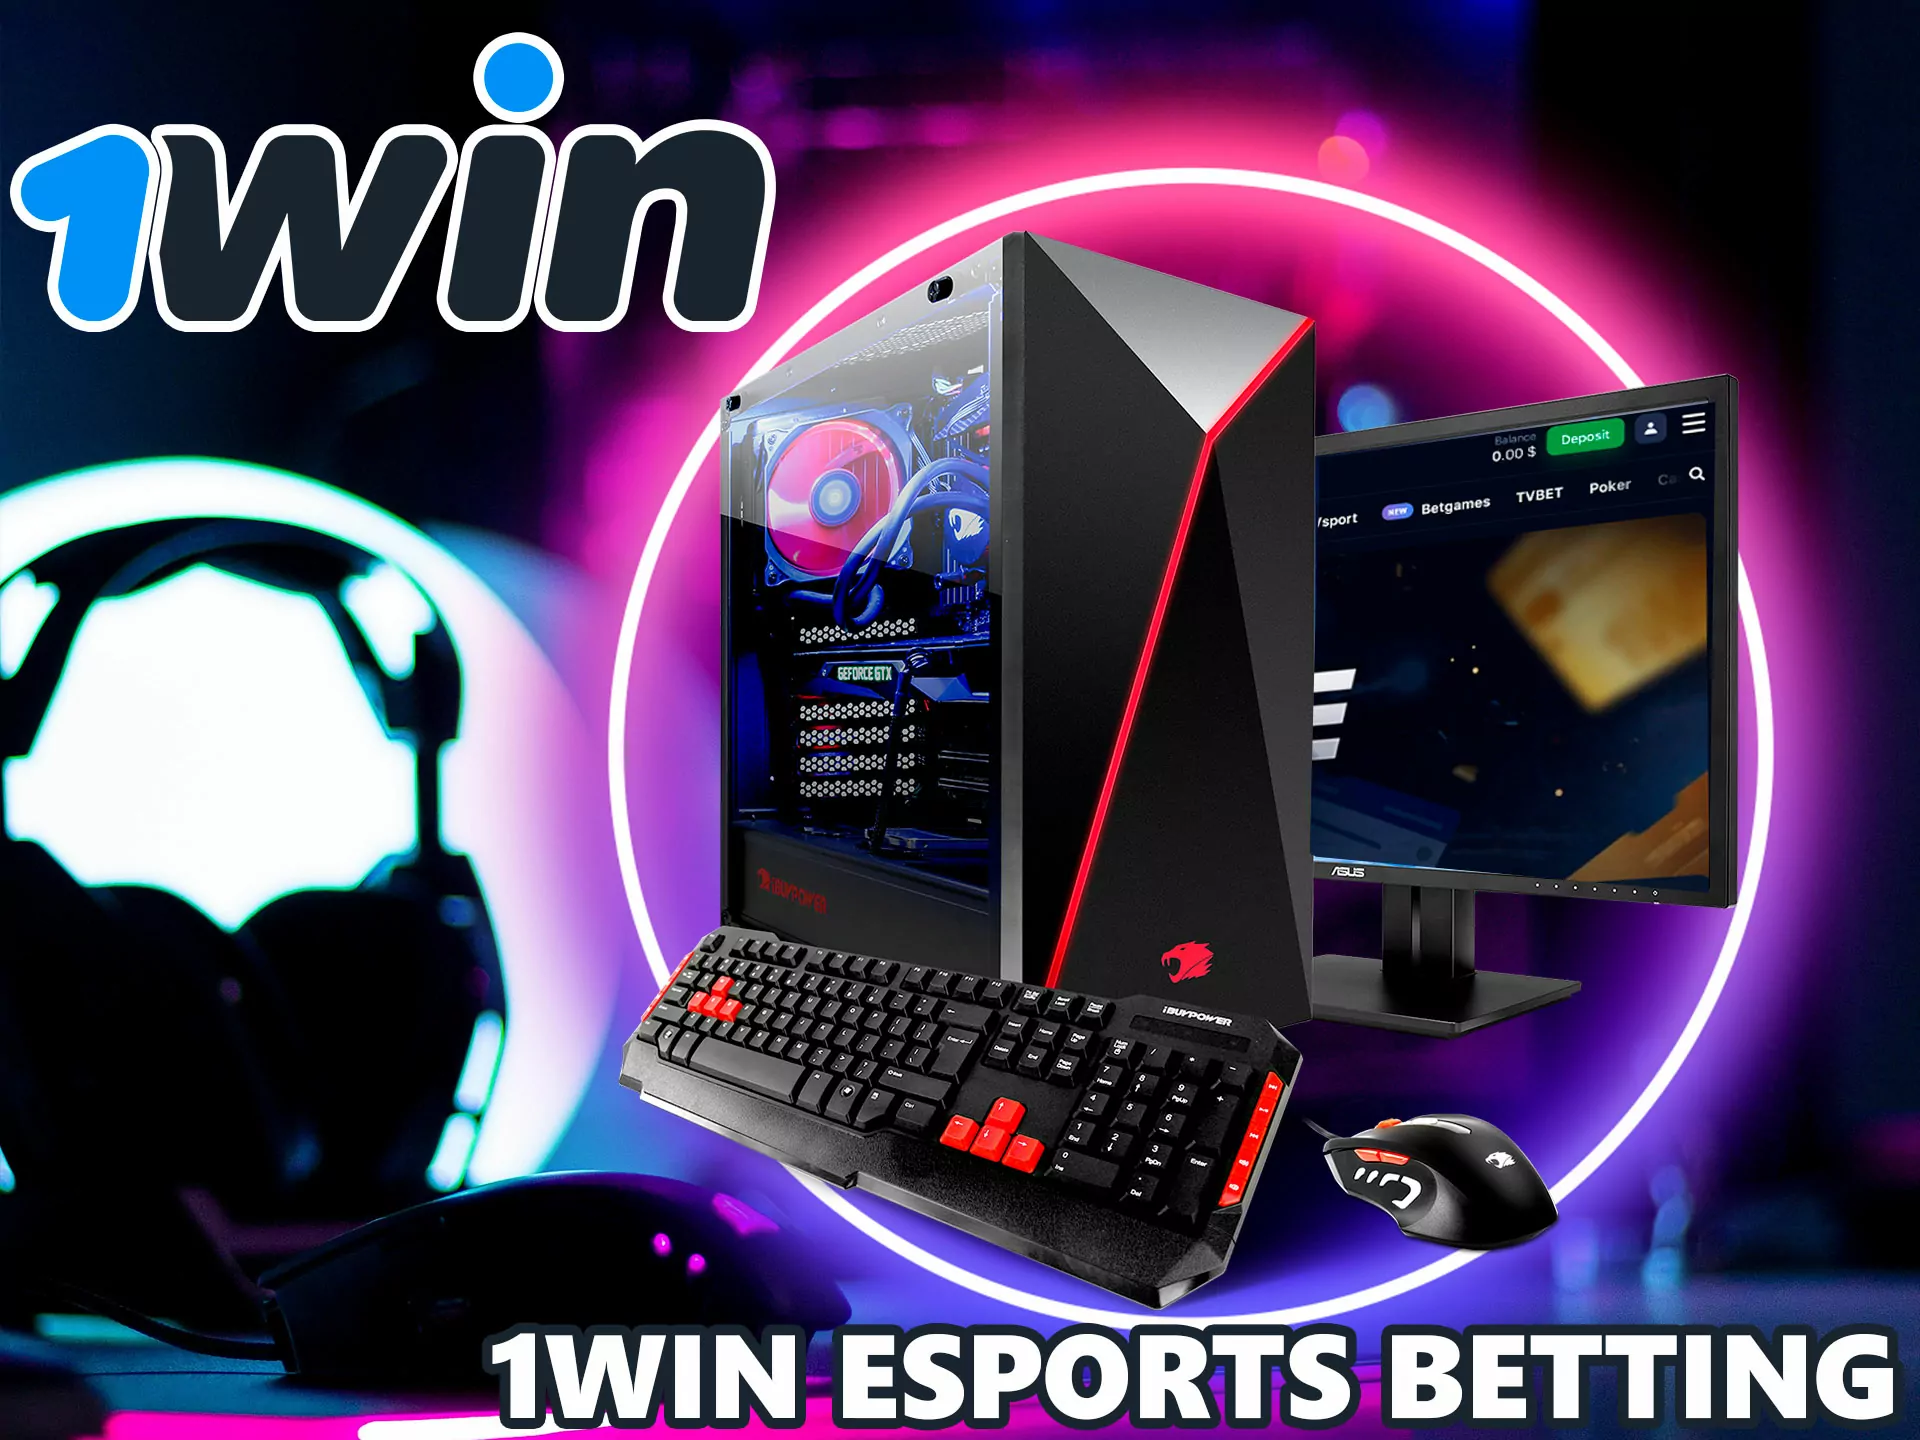 All over the world, computer gaming is gaining momentum, so you can easily bet on this interesting sport.